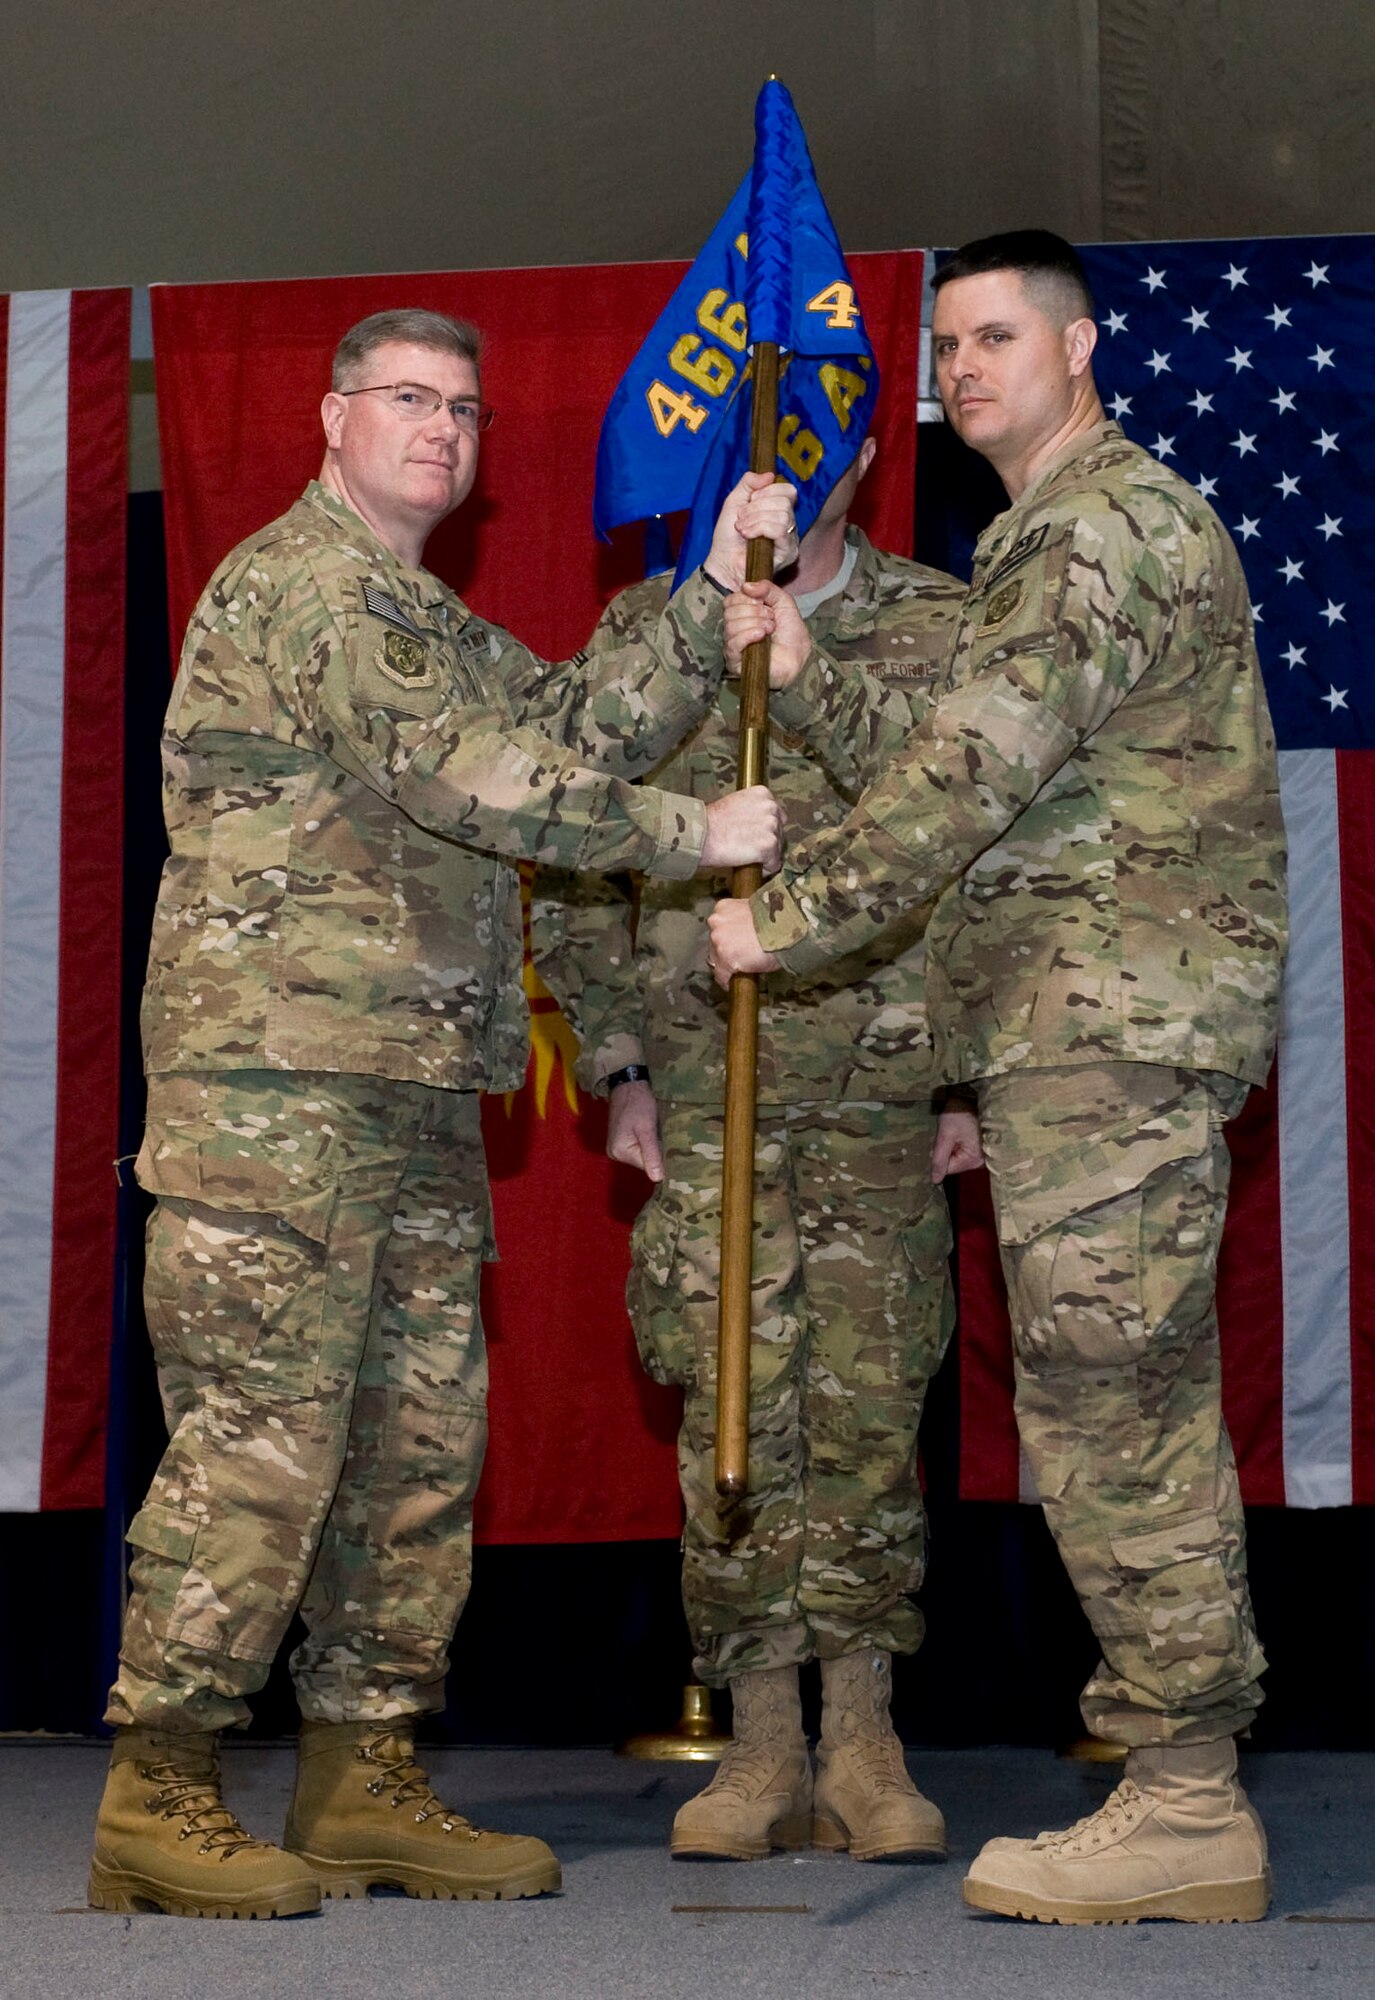 Col. John Cline, left, 466th Air Expeditionary Group commander passes the newly activated 466th Air Expeditionary Squadron guidon to Lt. Col. Joshua Hetsko, incoming commander, during an activation and asssumption of command ceremony, Transit Center at Manas, Kyrgyzstan, Nov. 26, 2012. Hetsko?s new squadron will assist the 466 AEG?s mission to provide administrative support and accountability for more than 2,300 Joint Expeditionary Tasking Airmen and Individual Augmentees serving throughout Afghanistan. (U.S. Air Force photo/Senior Airman Stephanie Rubi)